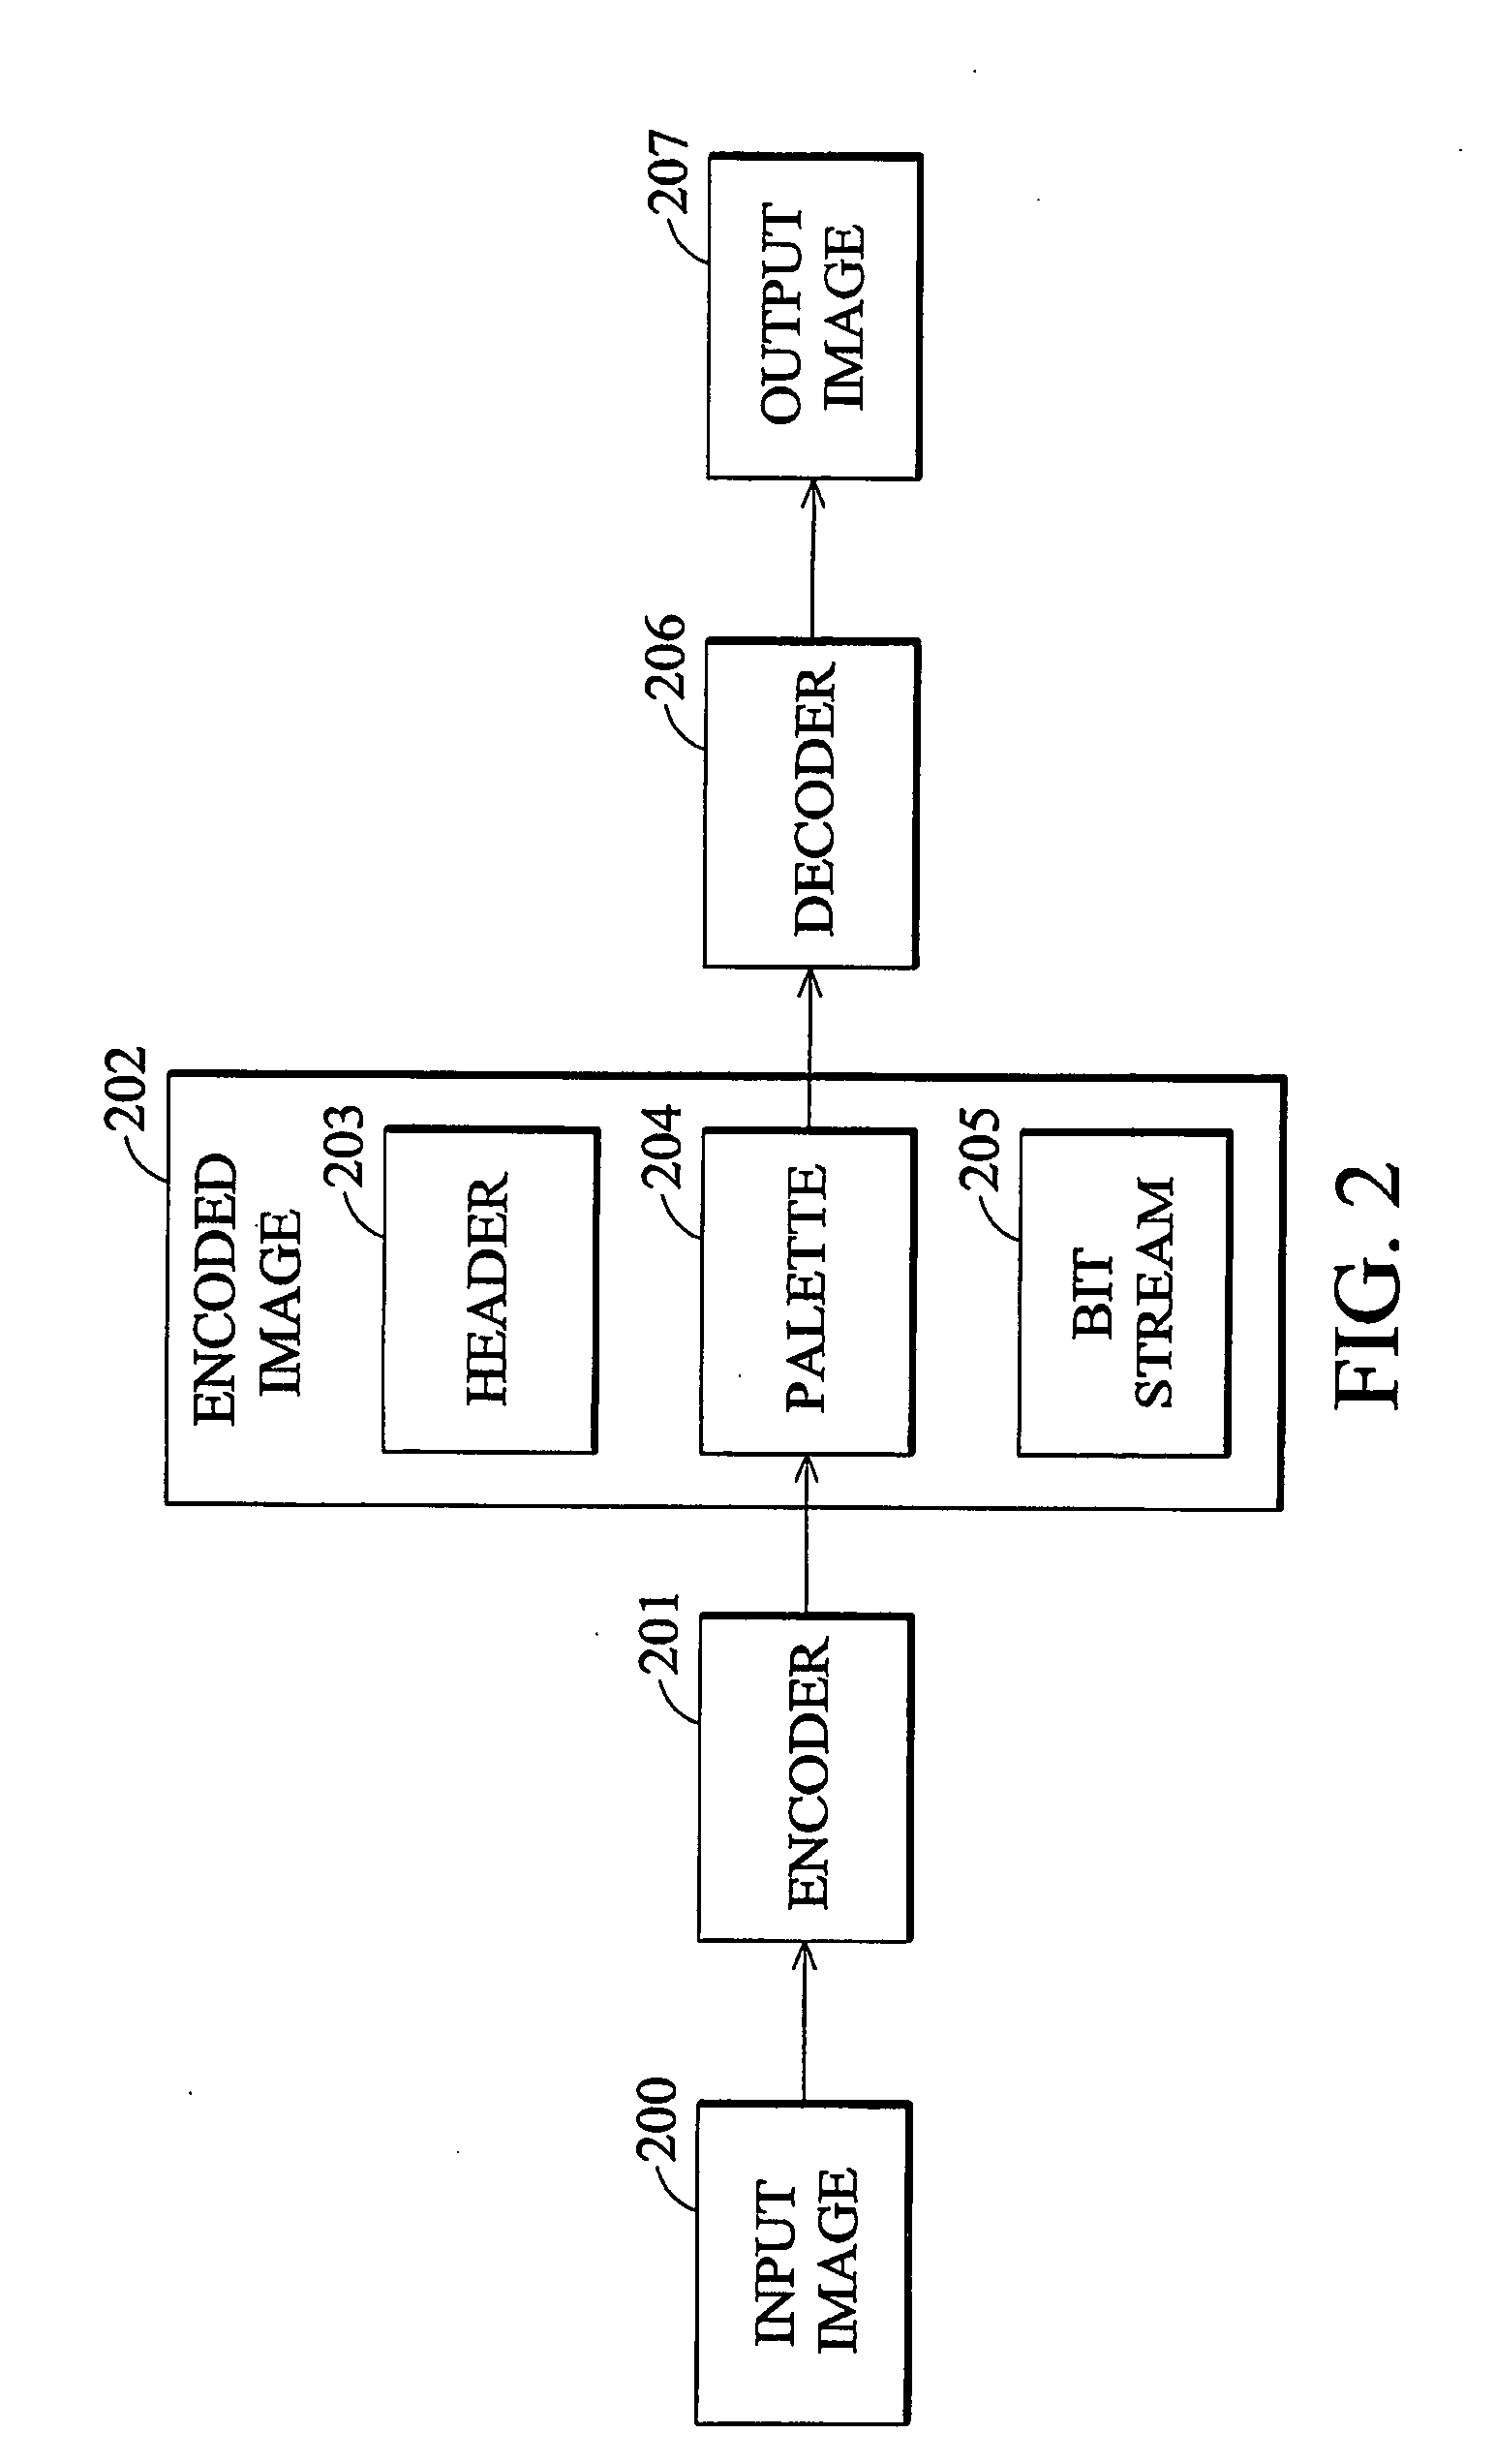 Method and apparatus for displaying an encoded image